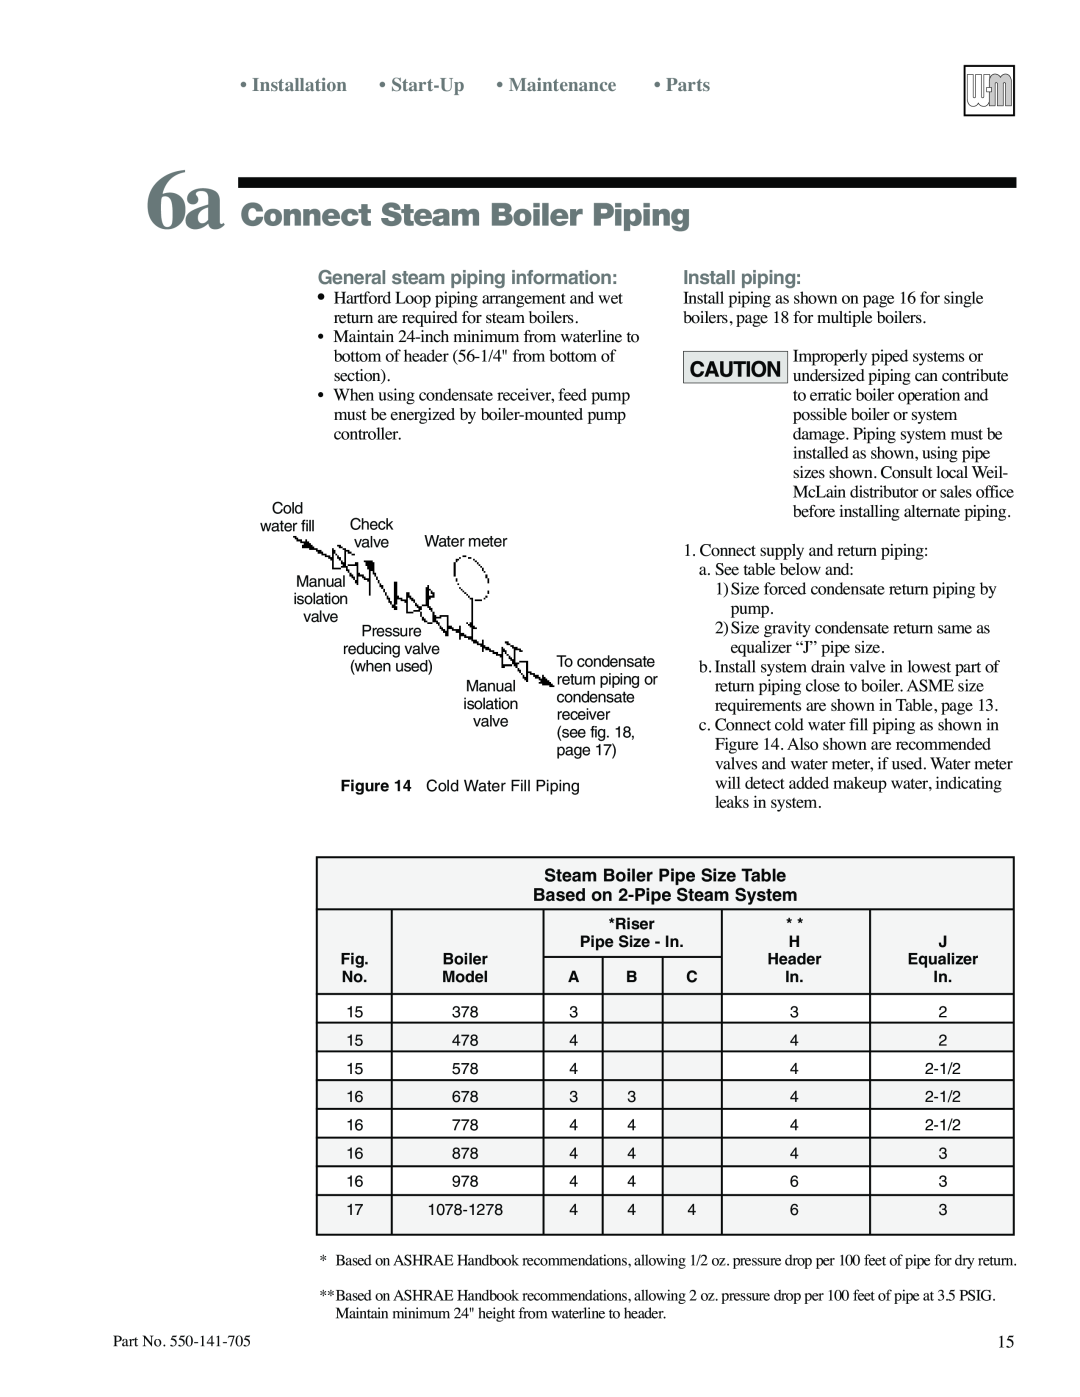 Weil-McLain 78 manual 6a Connect Steam Boiler Piping, Installation, Start-Up, Maintenance, General steam piping information 